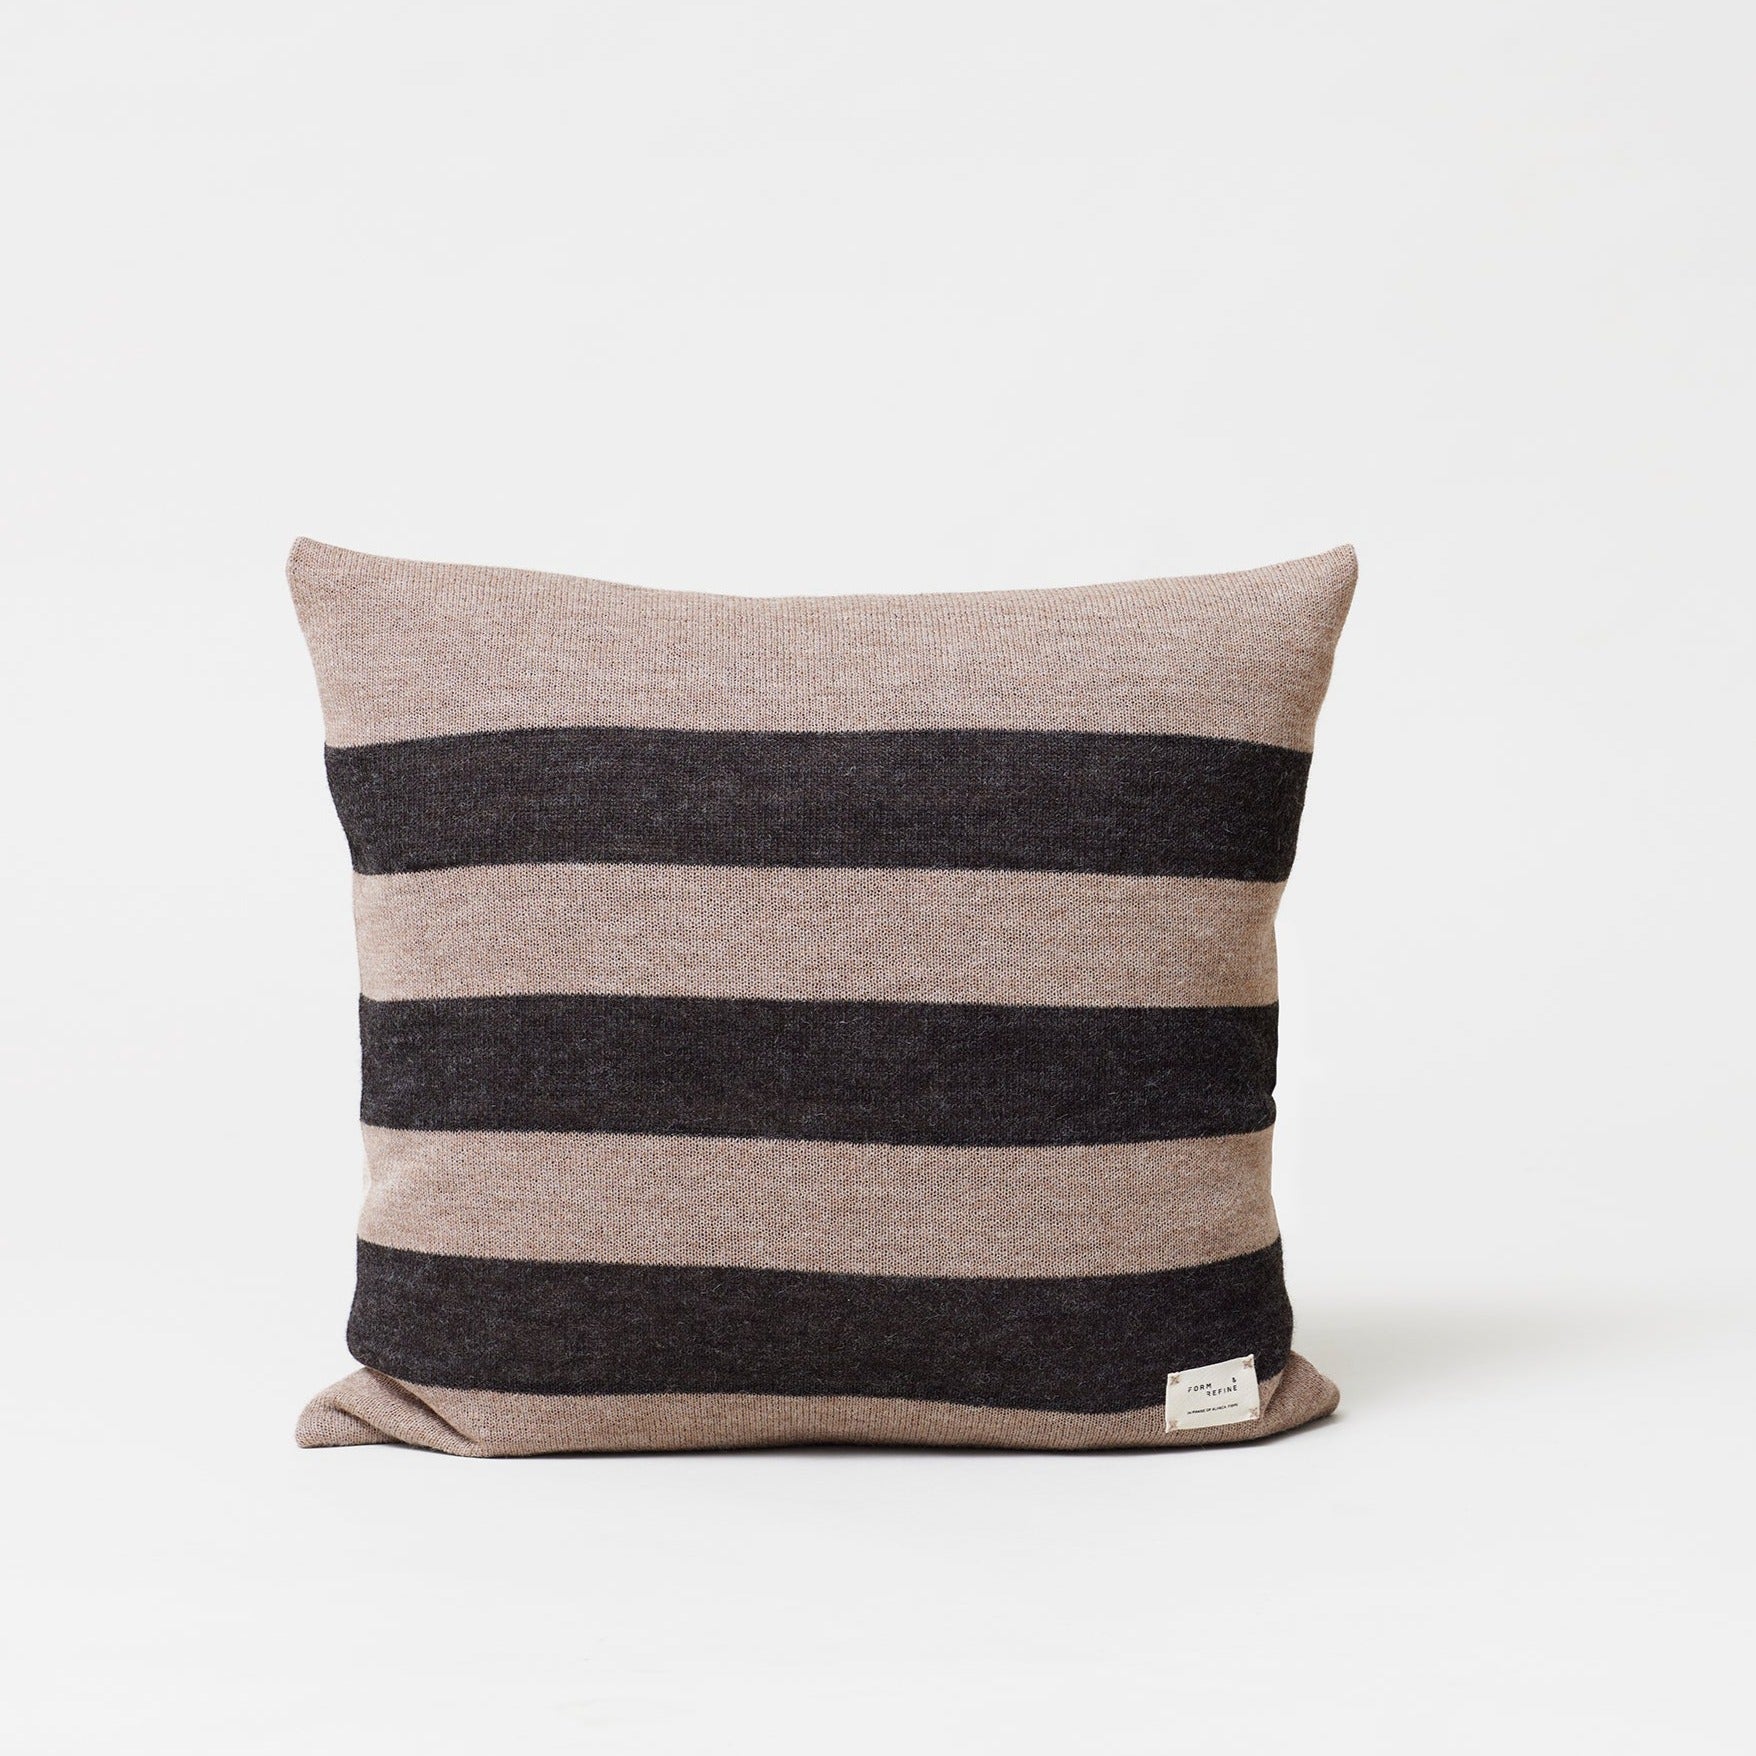 AYMARA Cushion Covers light brown and dark grey striped-front view